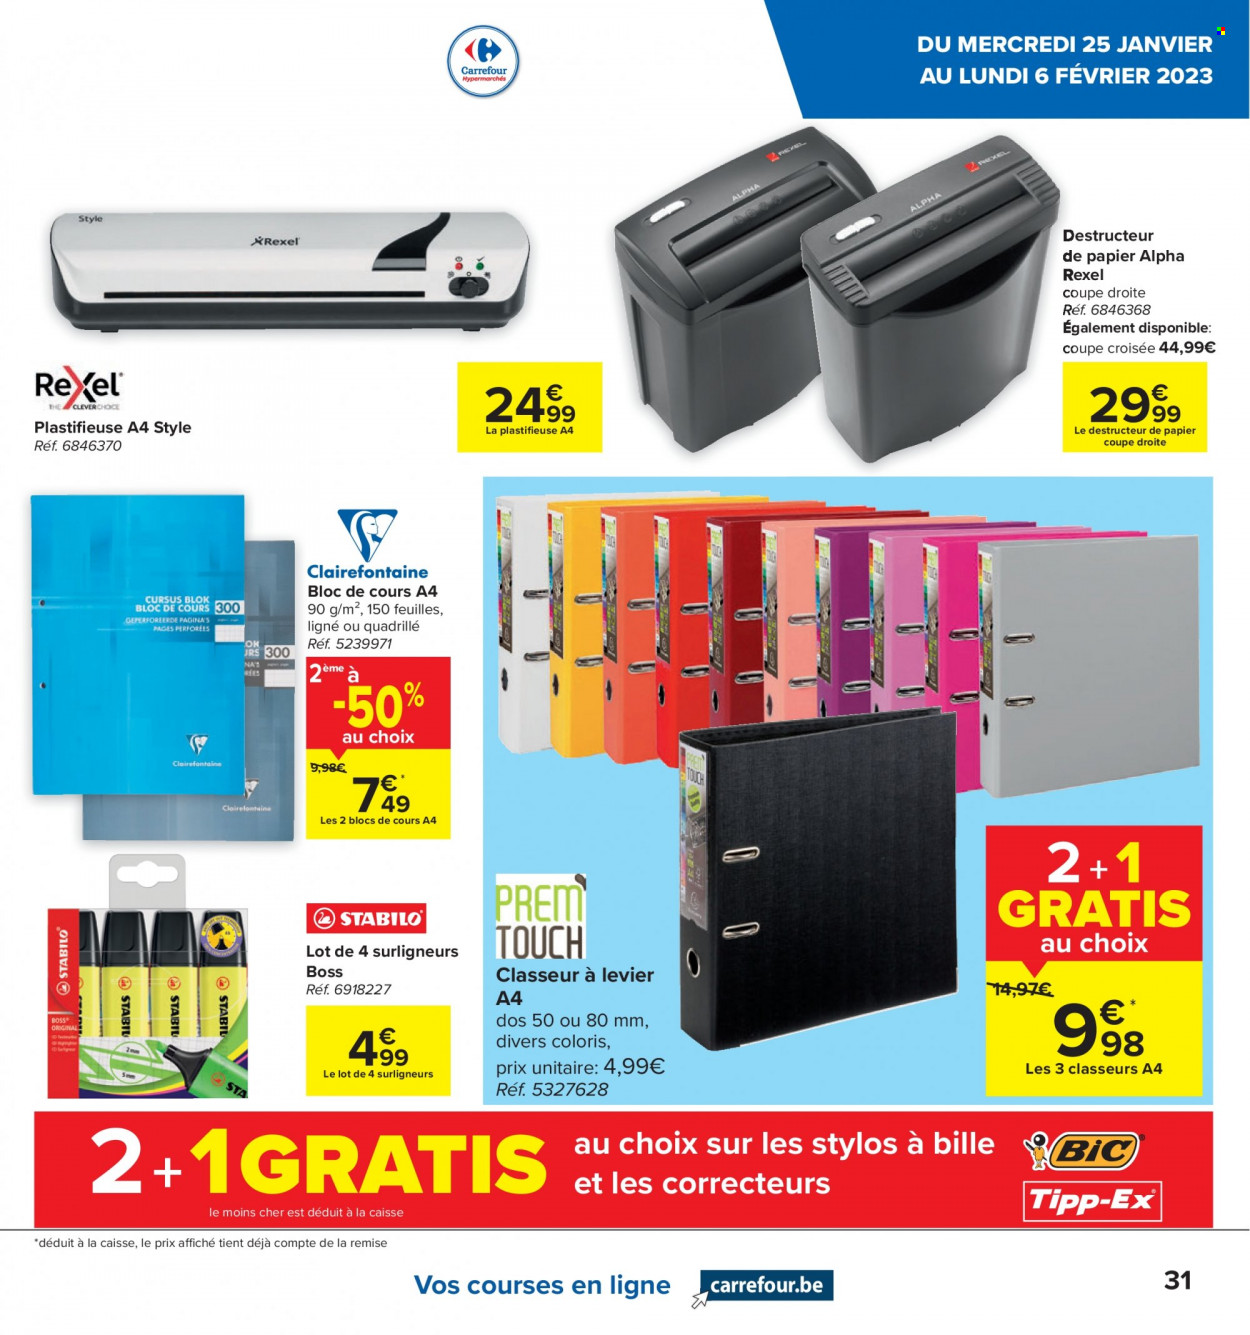 Catalogue Carrefour hypermarkt - 25.1.2023 - 6.2.2023. Page 11.